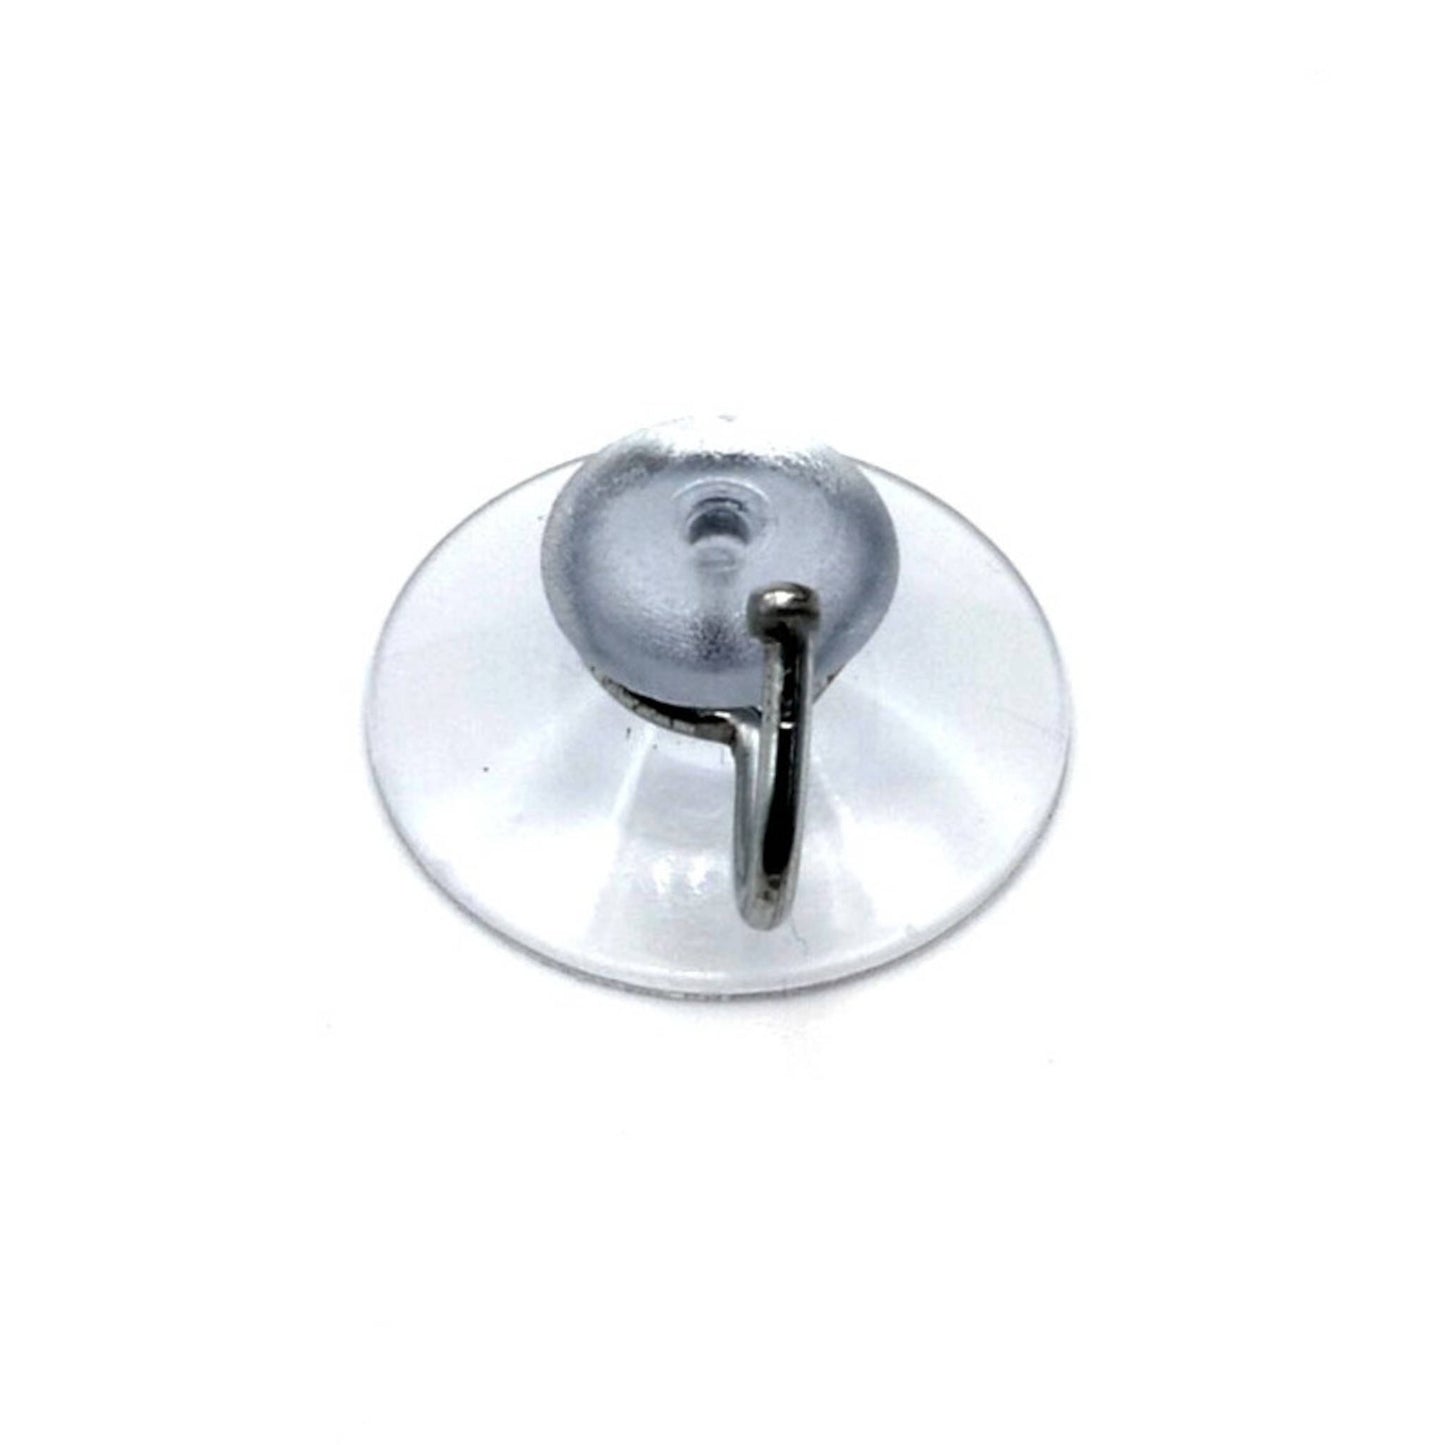 Suction cup hook